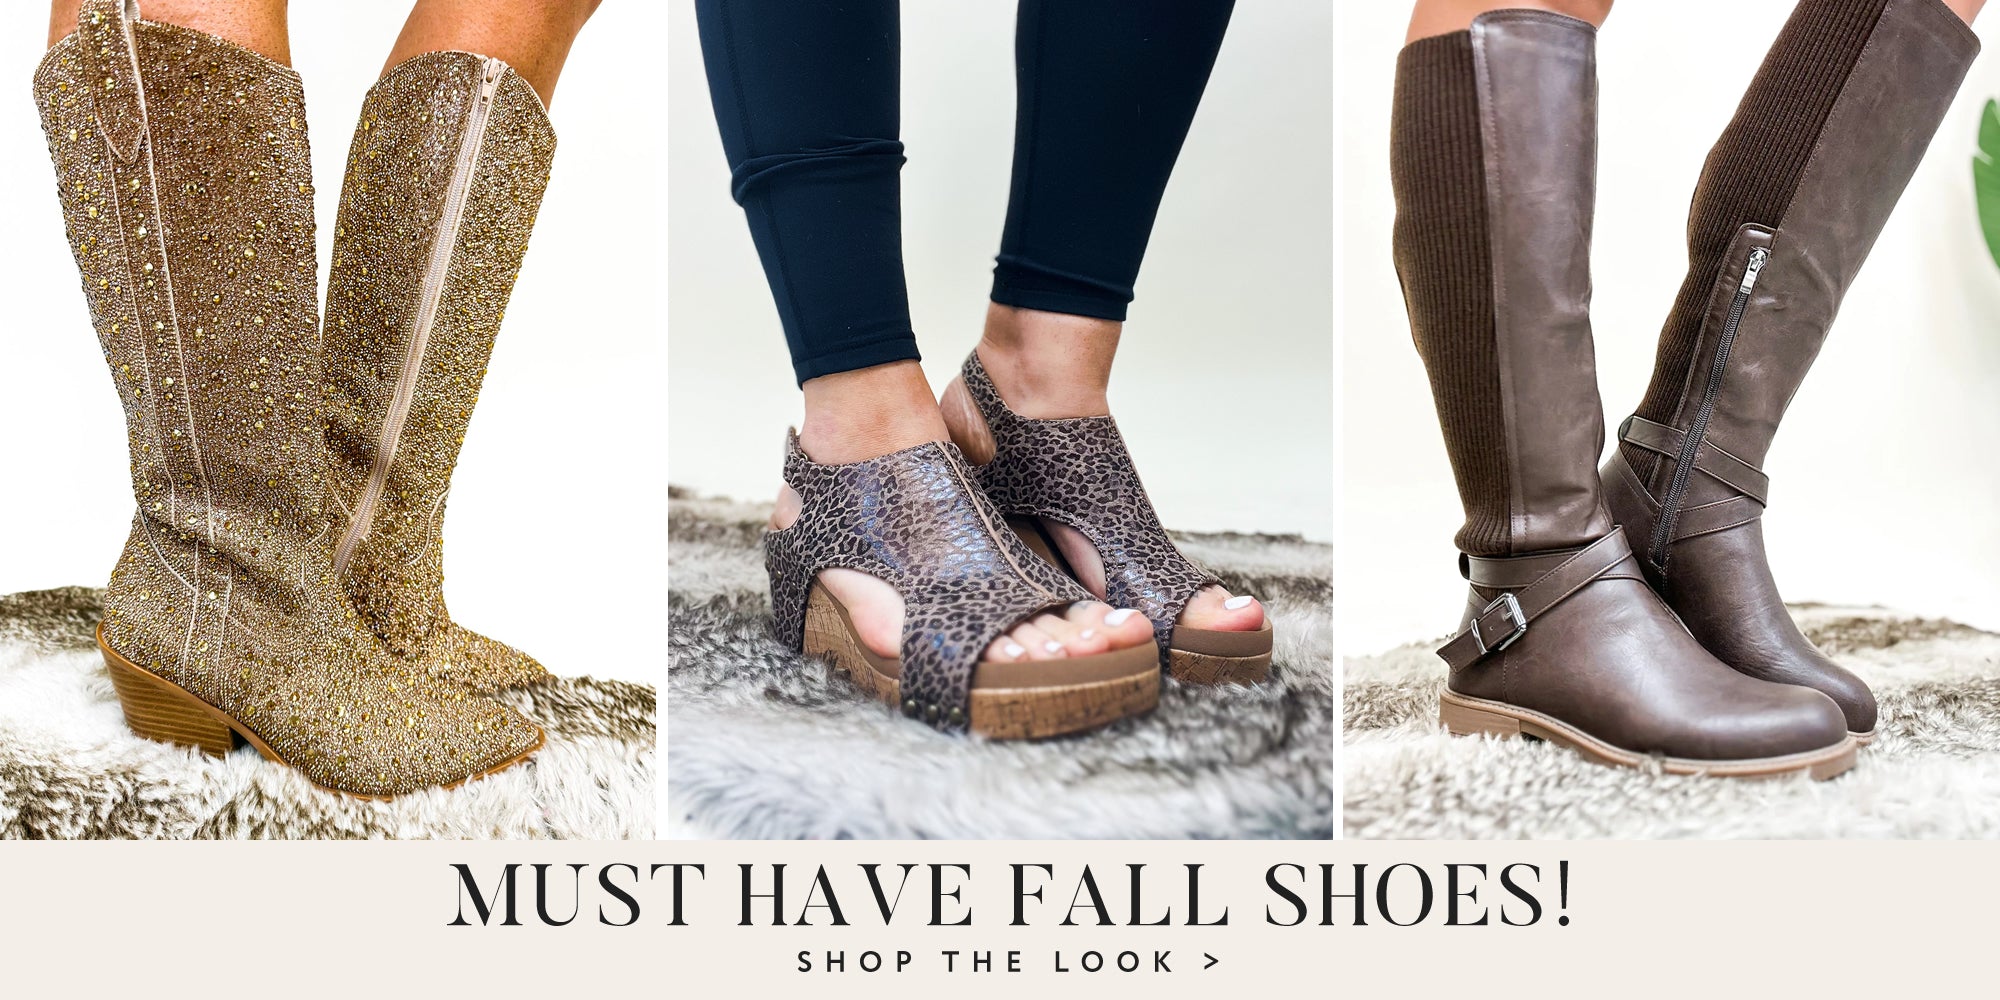 Shop our new shoes for fall!